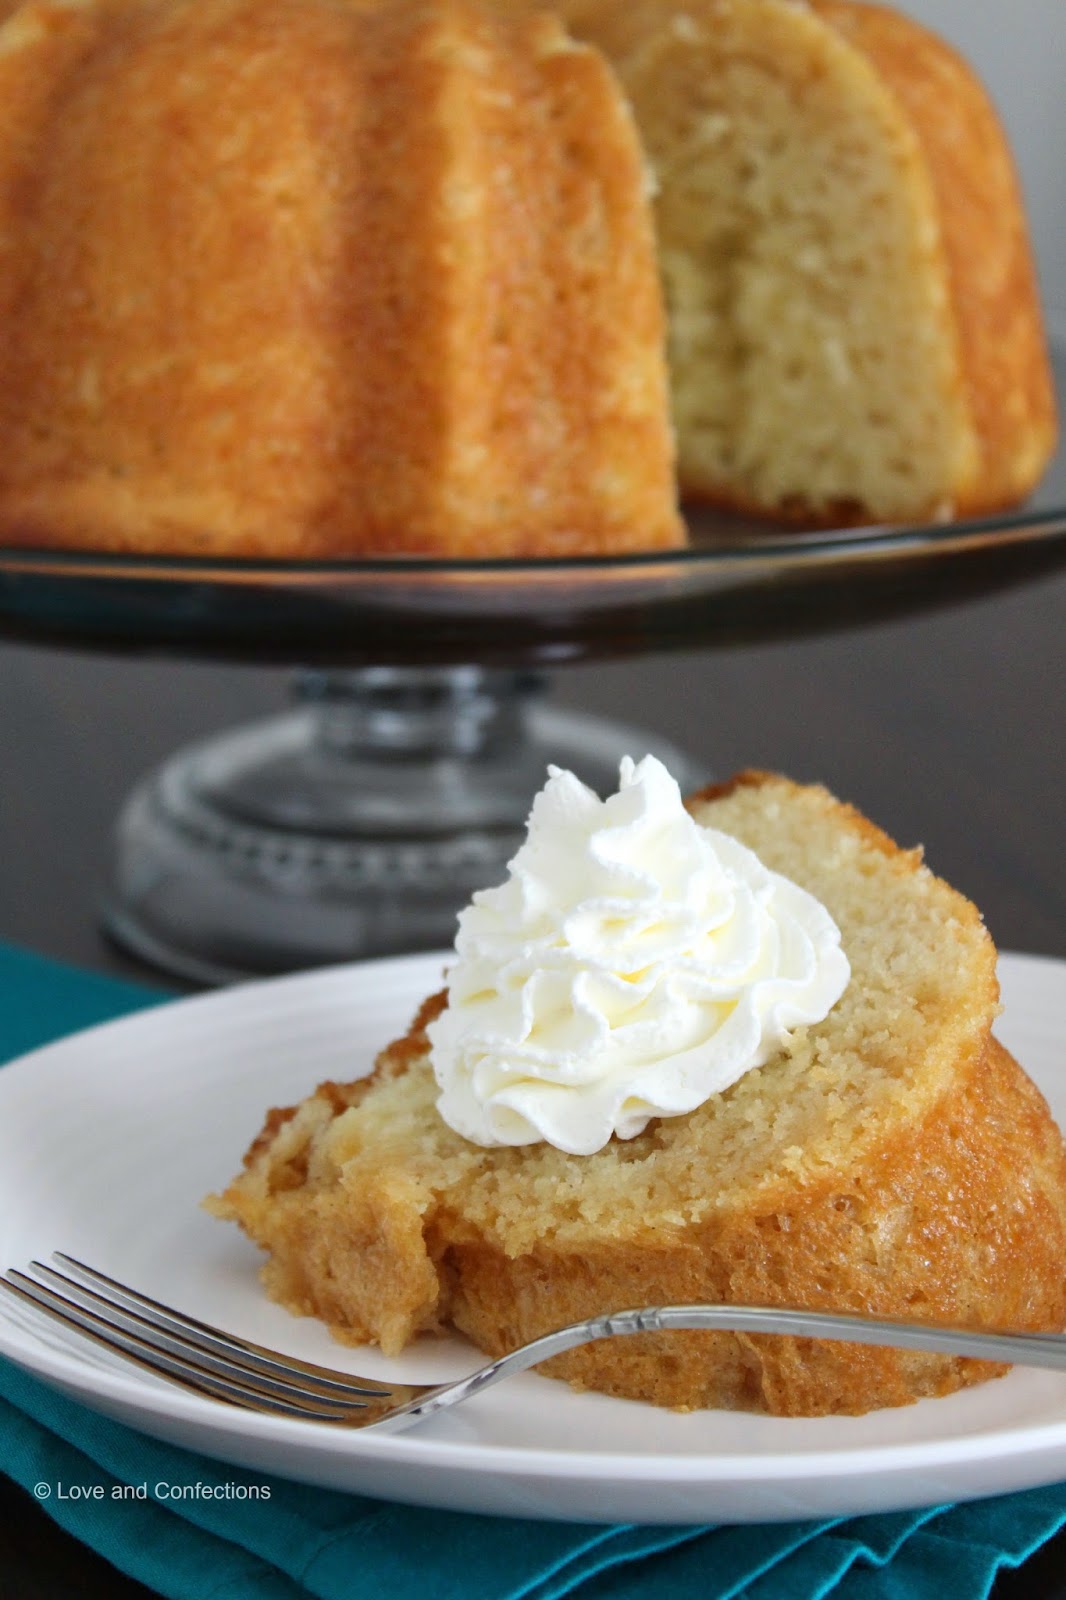 Love and Confections: Baba au Rhum #BundtBakers